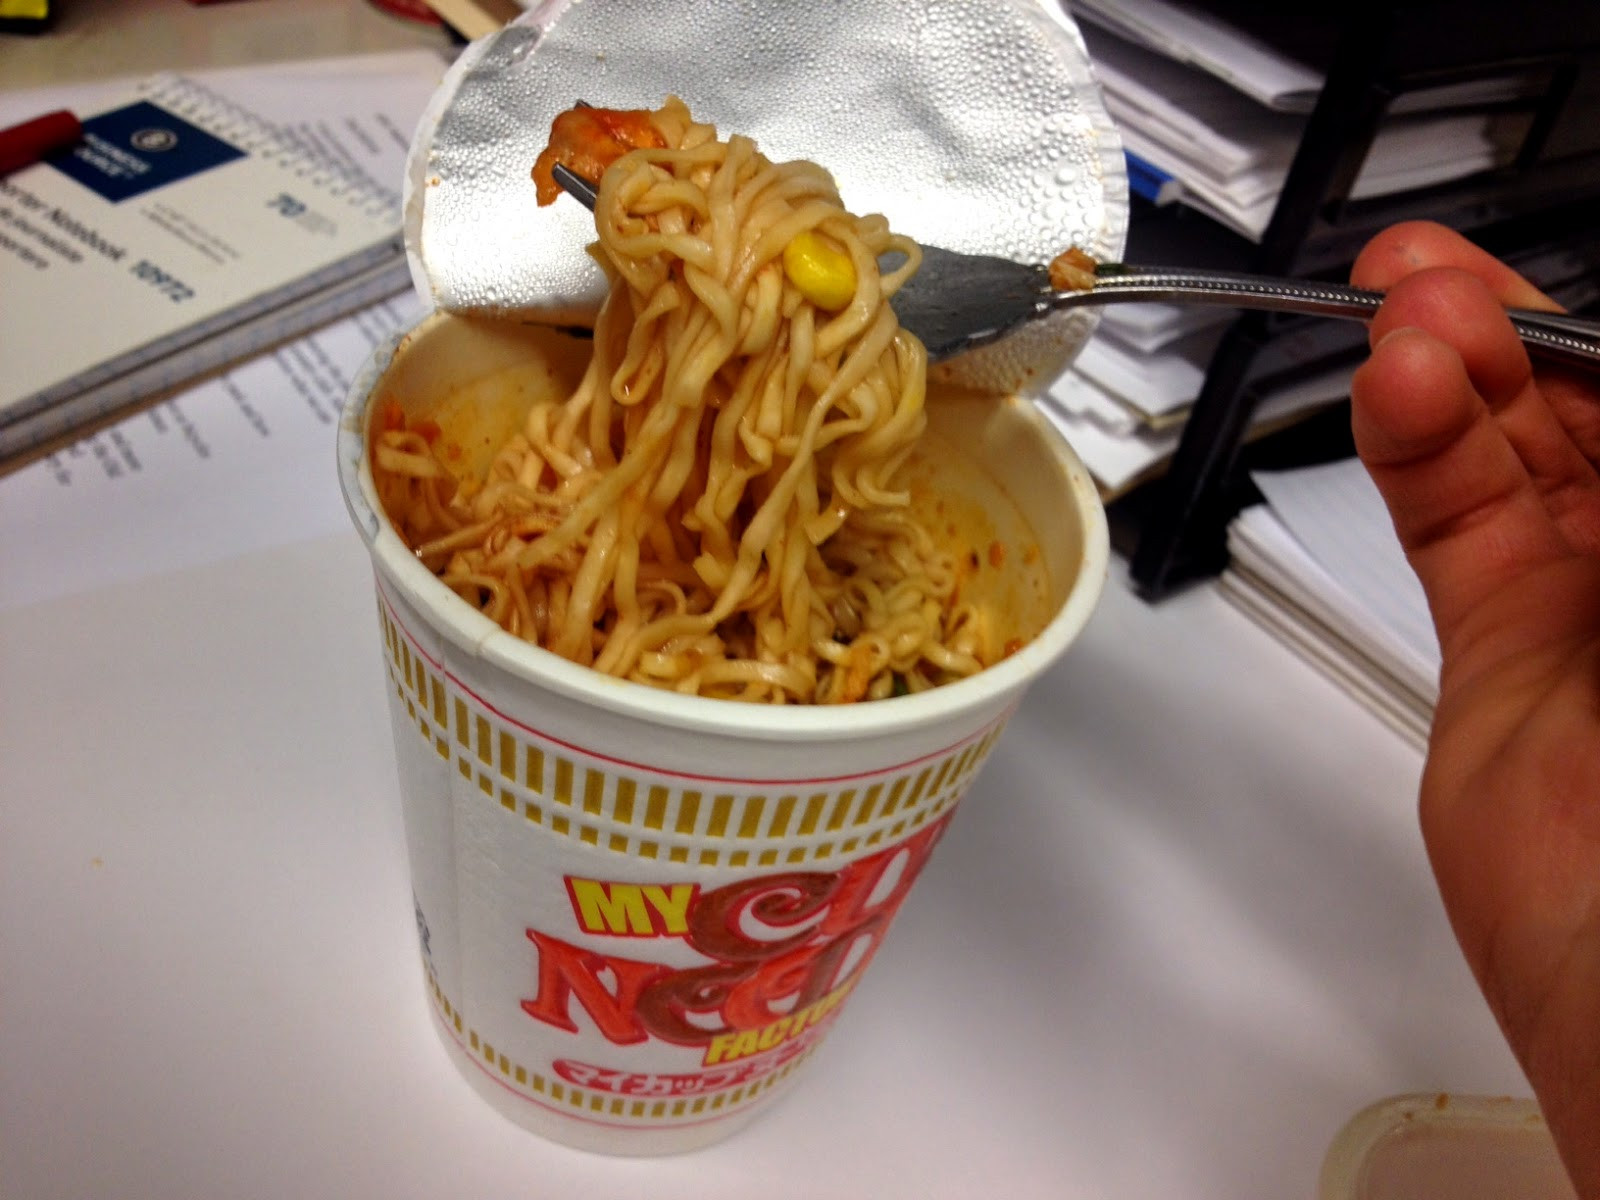 Microwave Cup Of Noodles
 How To Make Ramen Noodles In The Microwave – BestMicrowave